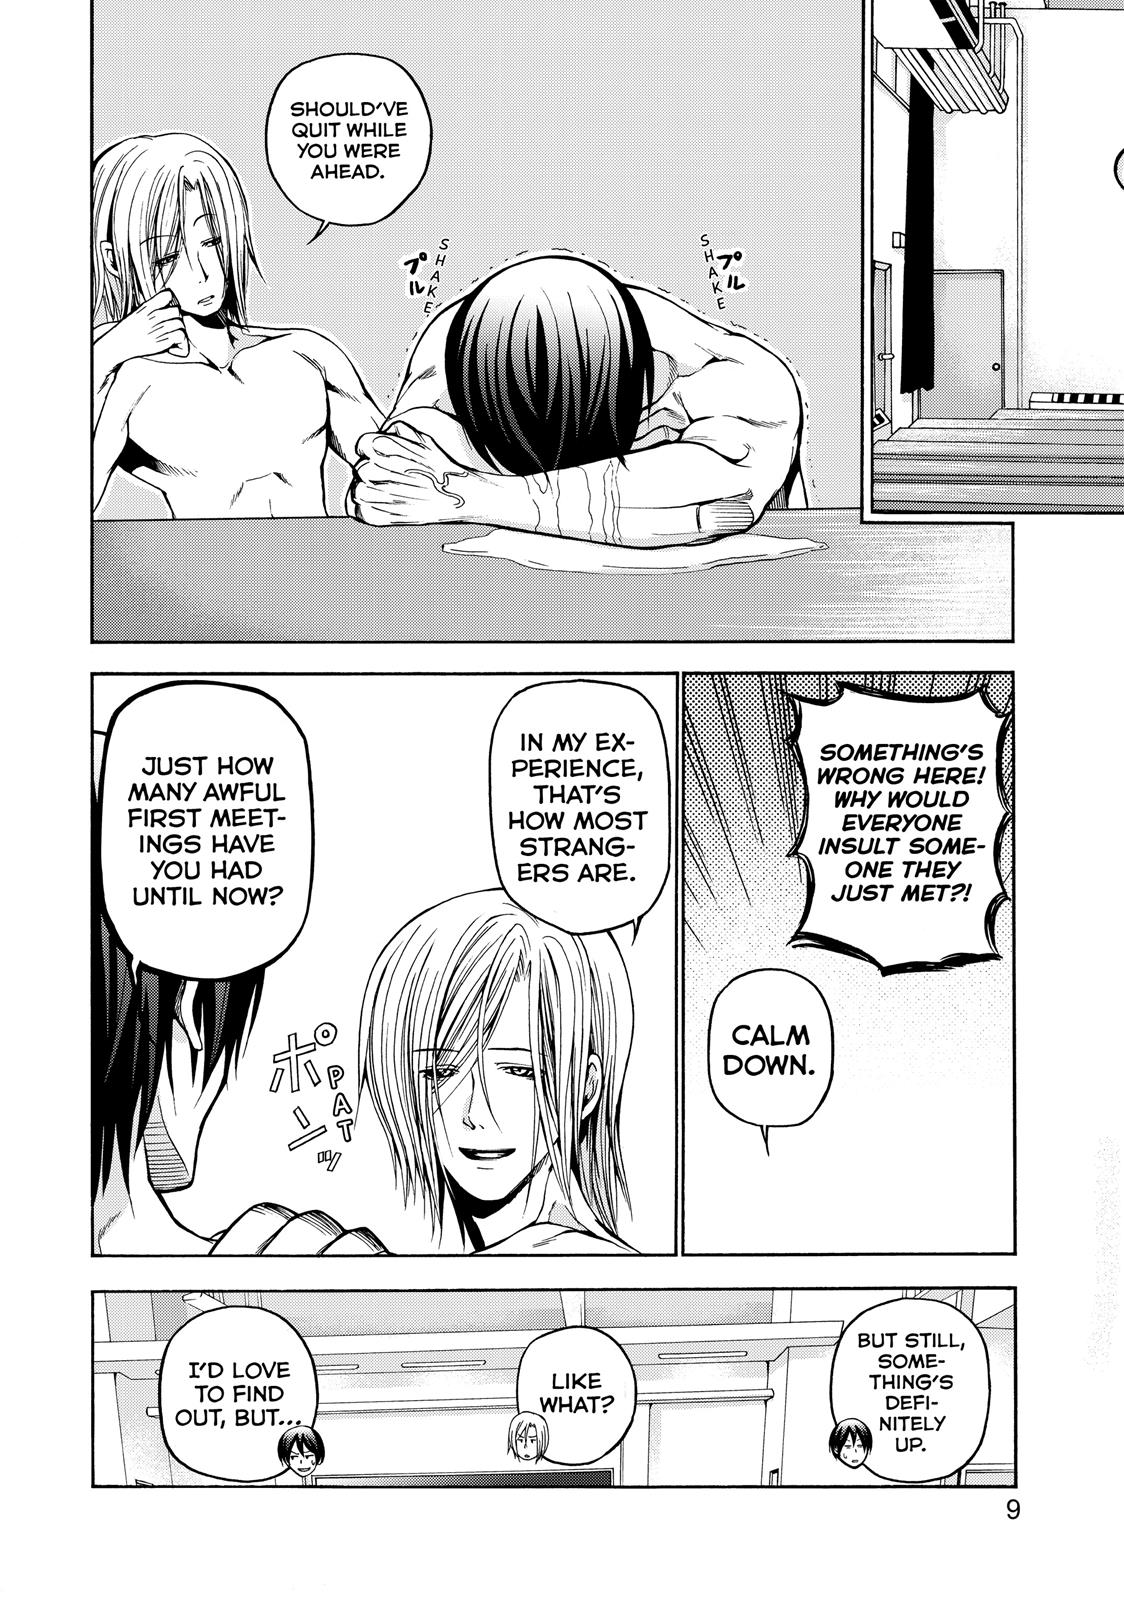 Grand Blue, Chapter 9 image 10